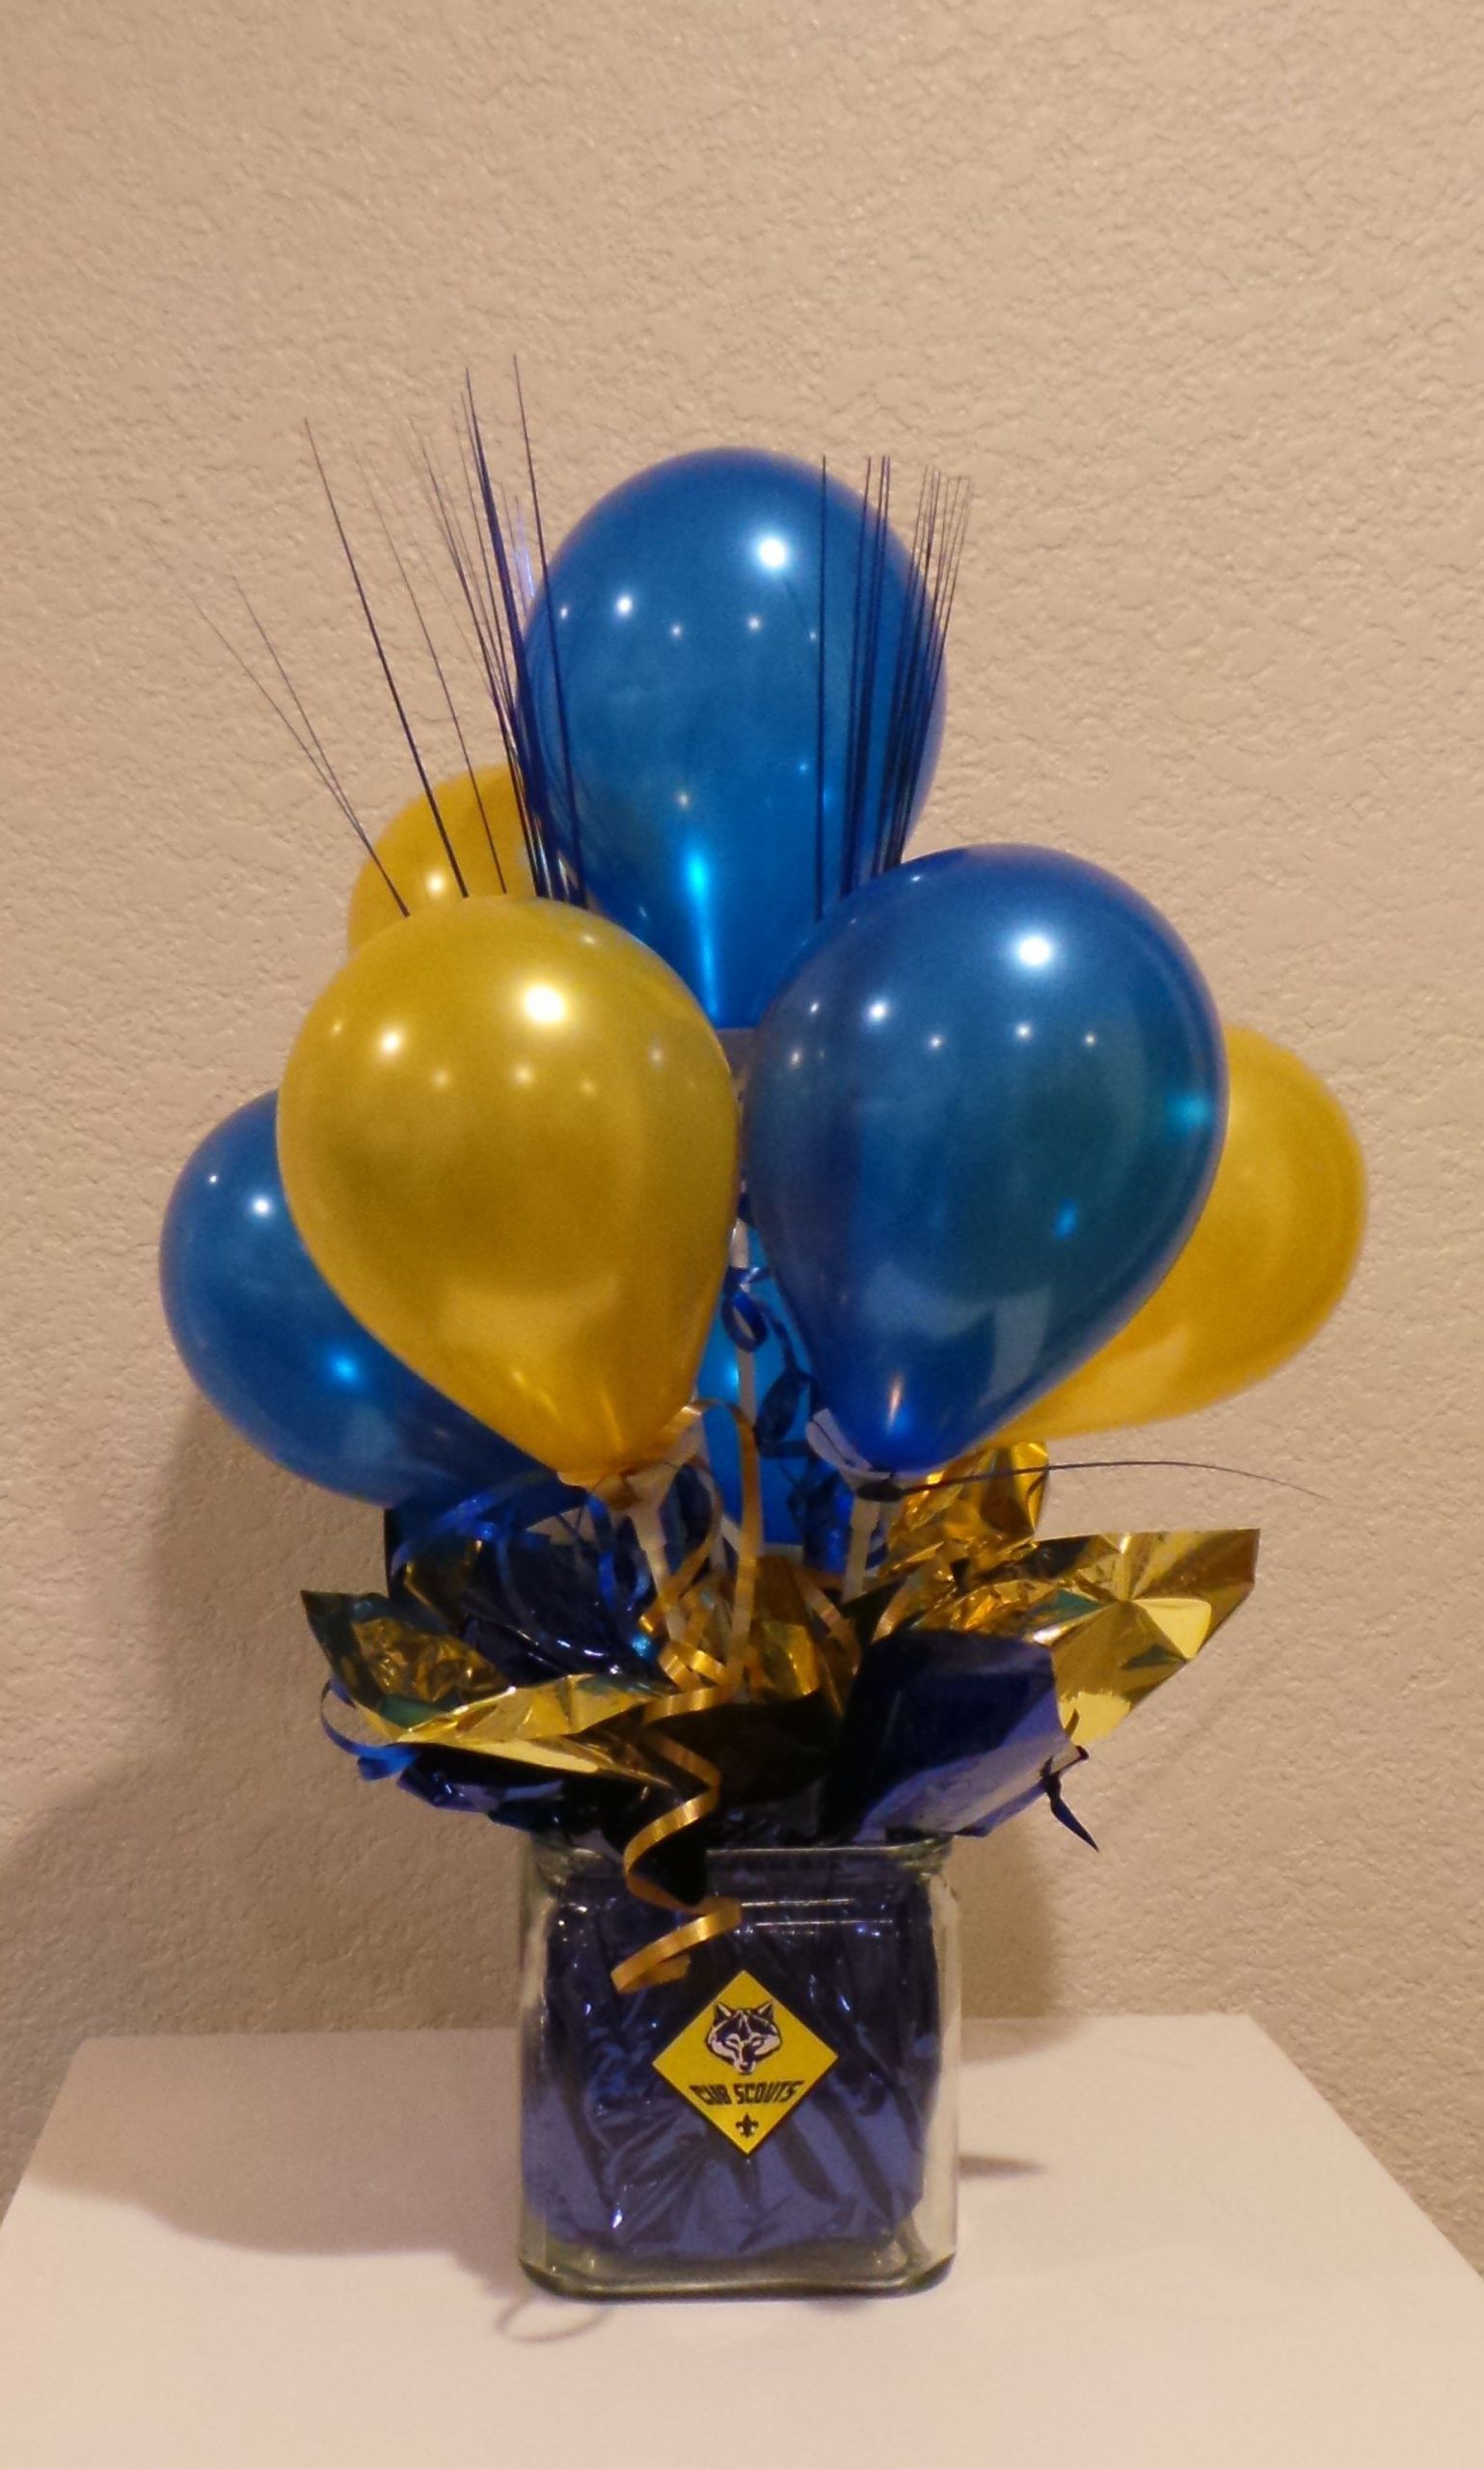 Graduation Party Balloon Ideas
 Pin by Shekena Smith Talley on College graduation party